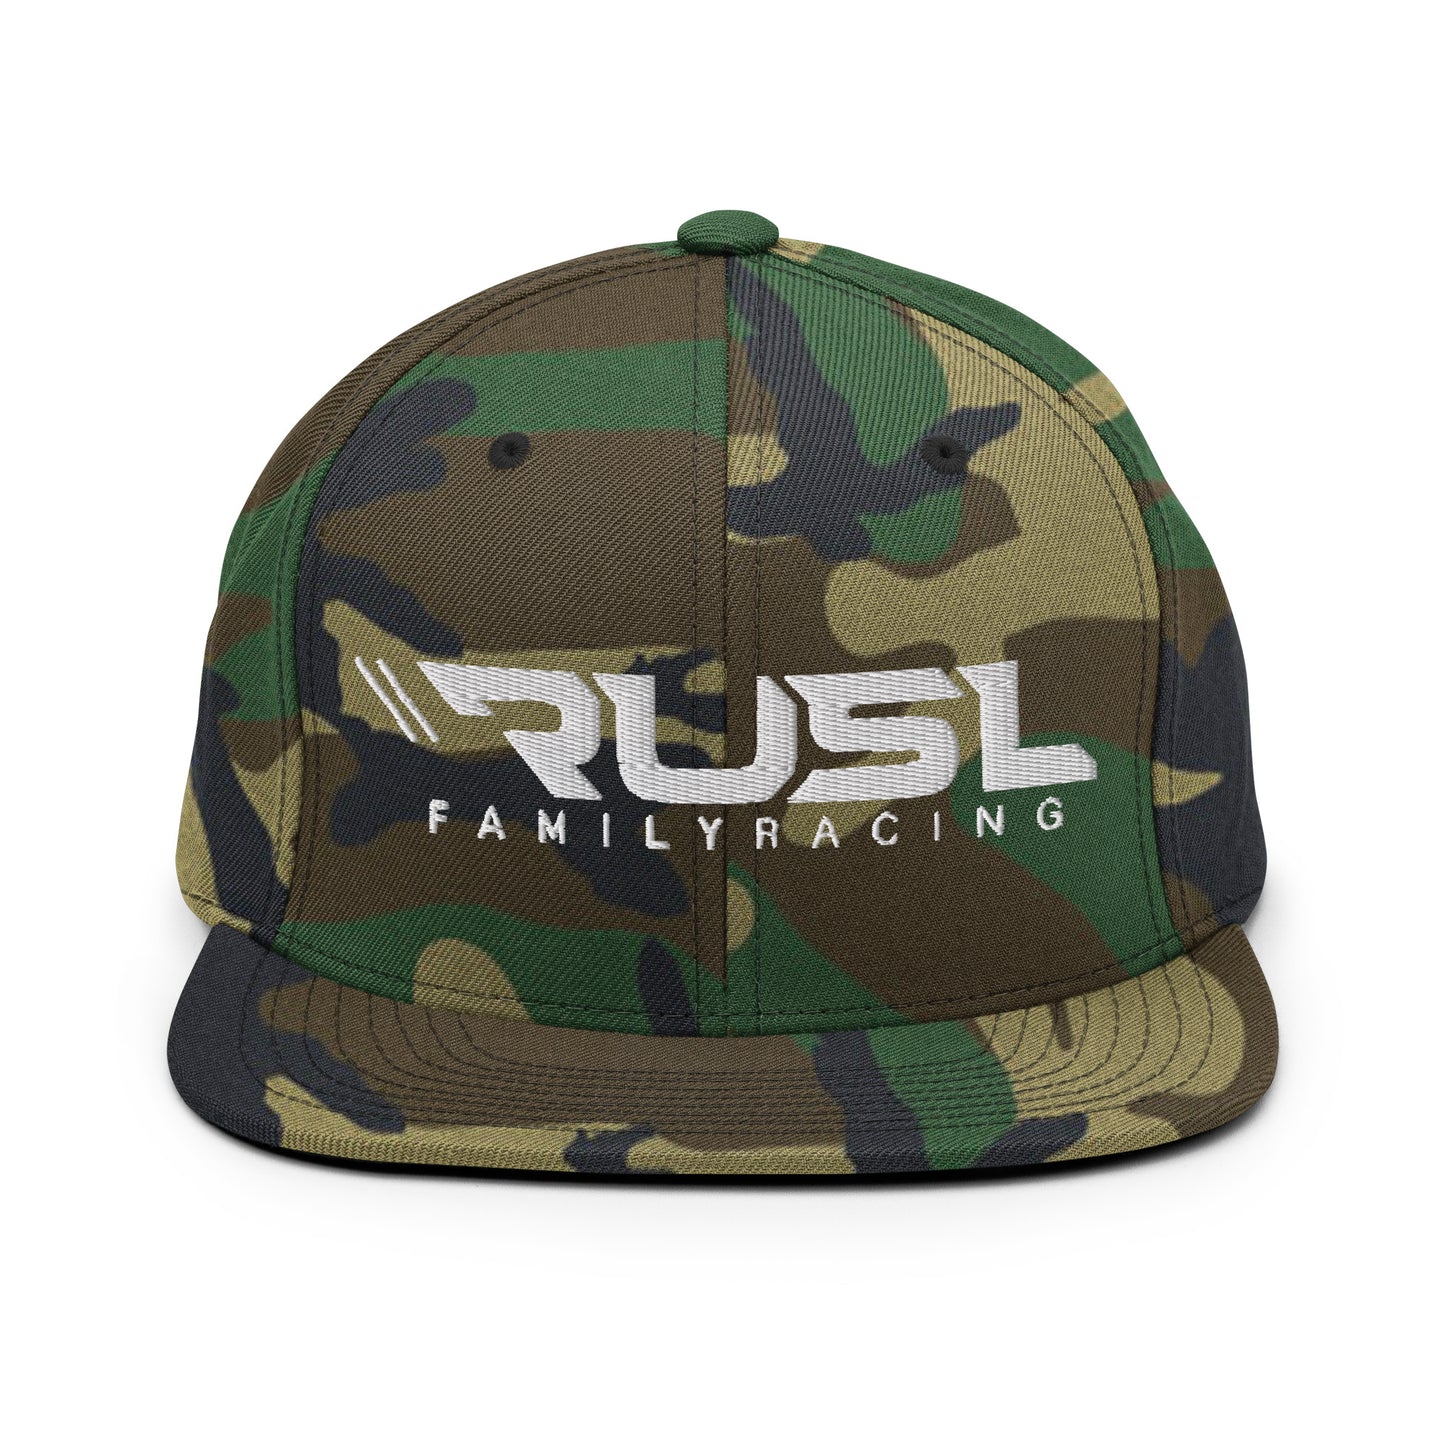 Russell Family Racing Snapback Hat